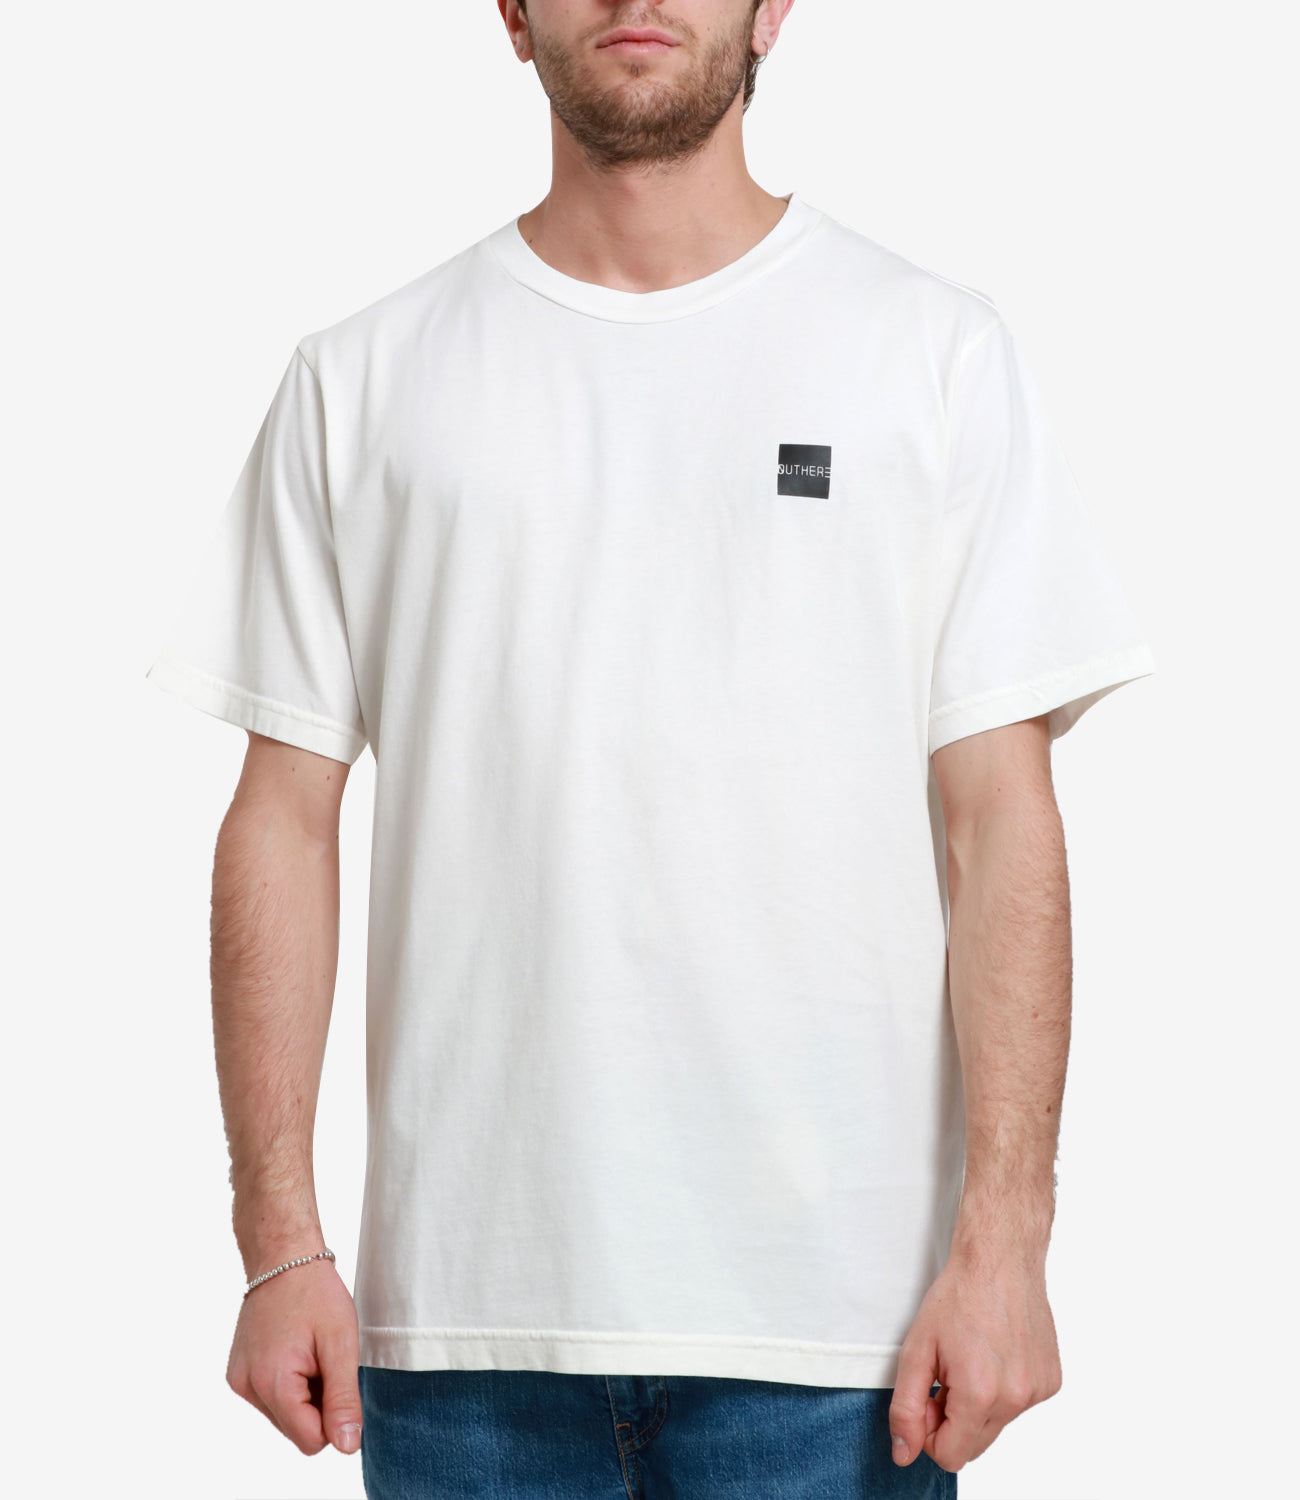 Outhere | T-Shirt White